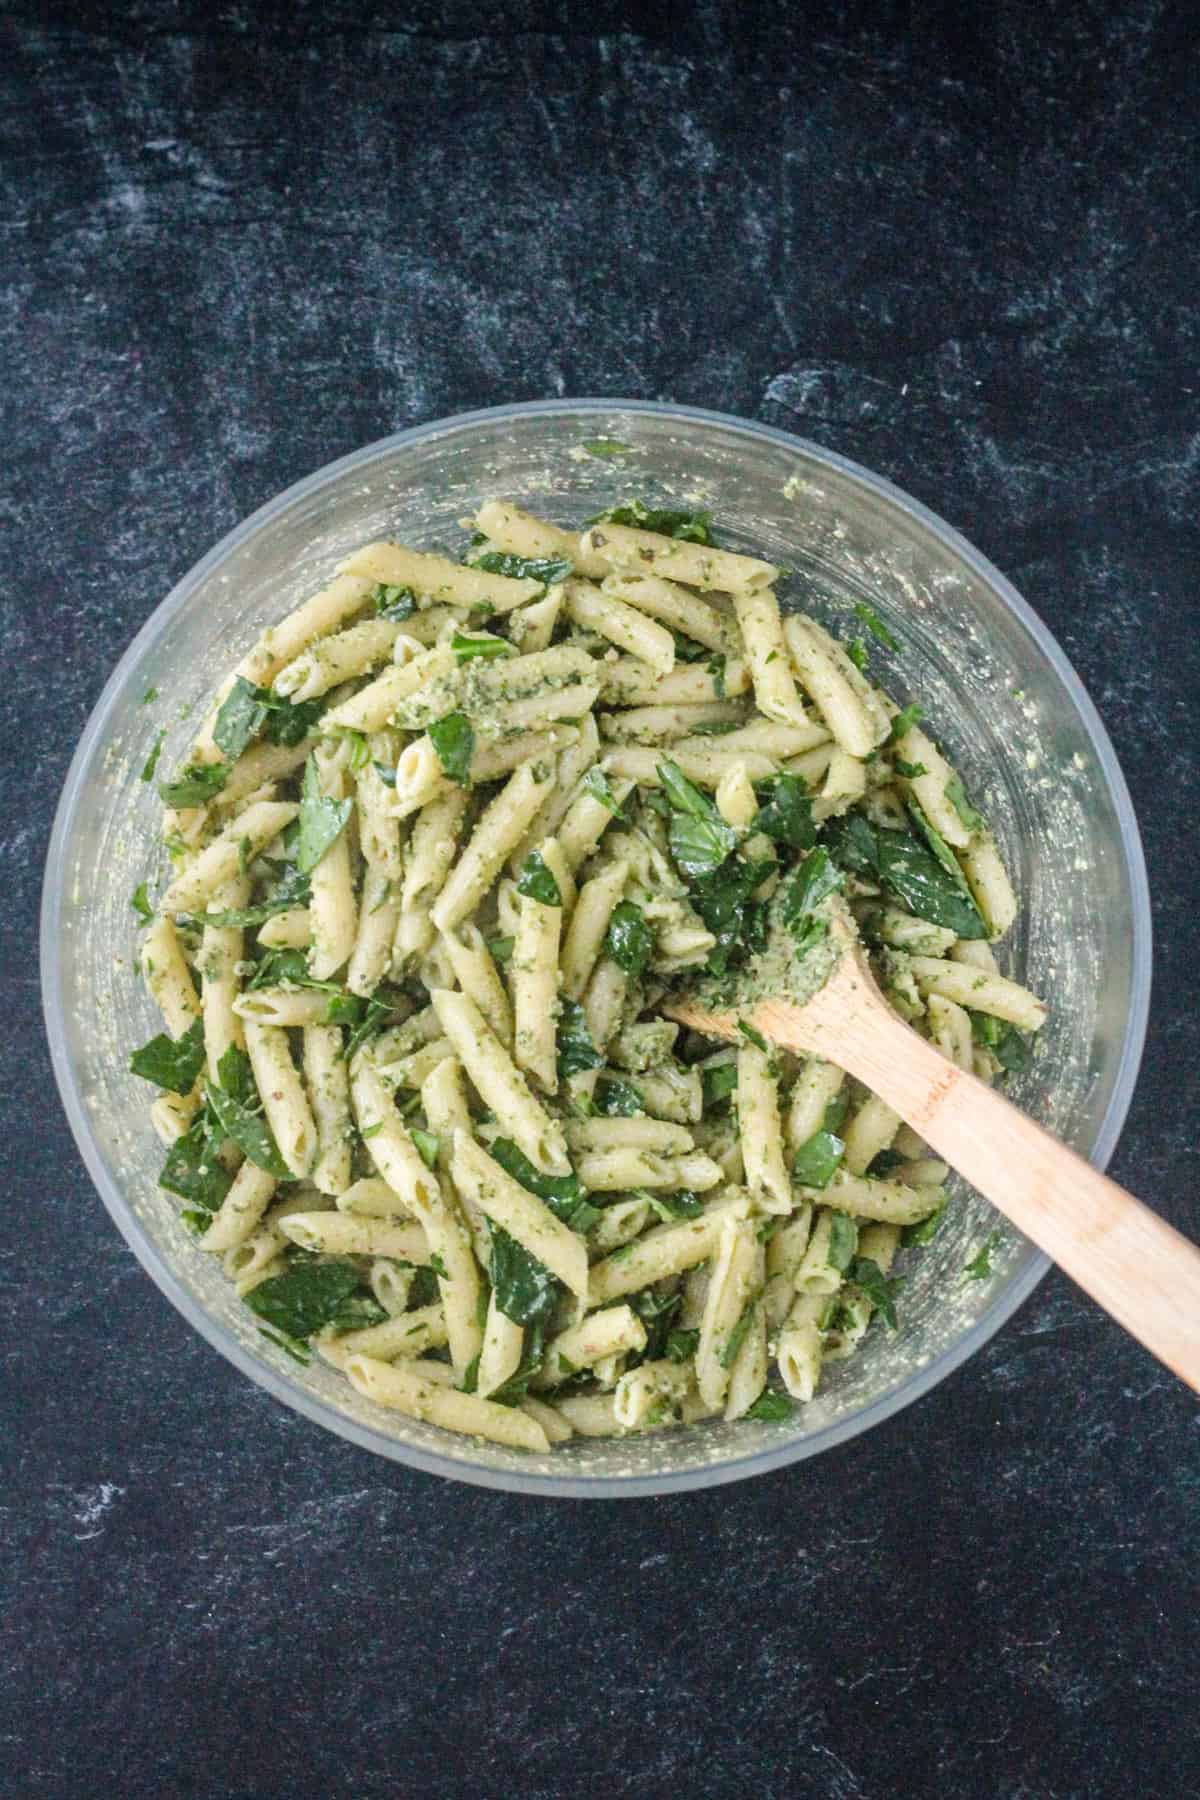 Spinach mixed in with the pasta and pesto.